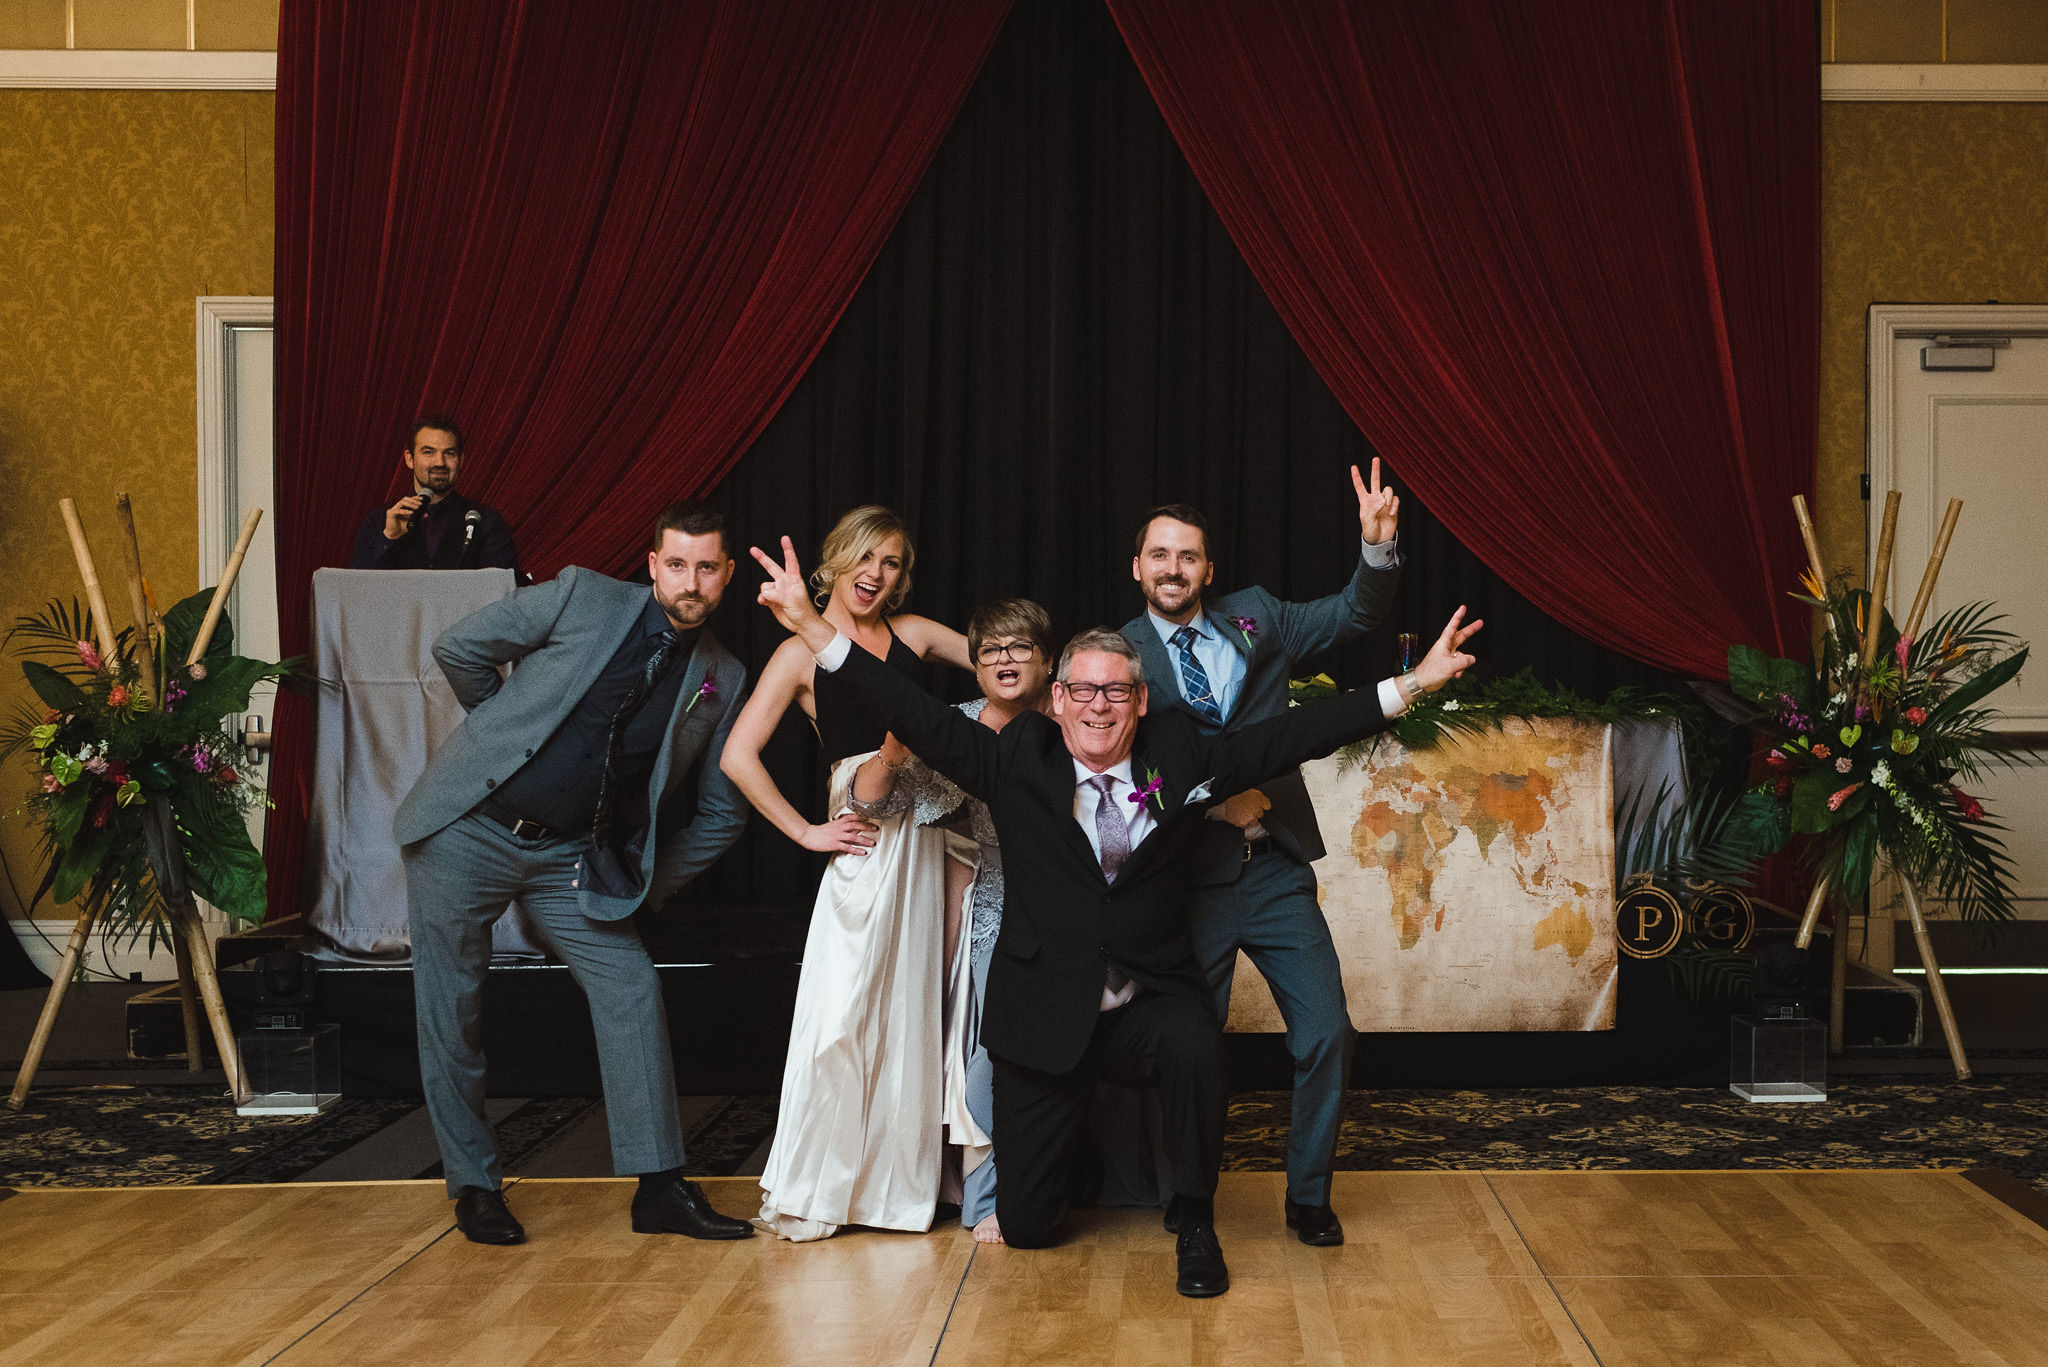 wedding guests posing together on the dance floor and holding up peace signs with their hands during wedding reception at the Hilton Fallsview in Niagara Falls